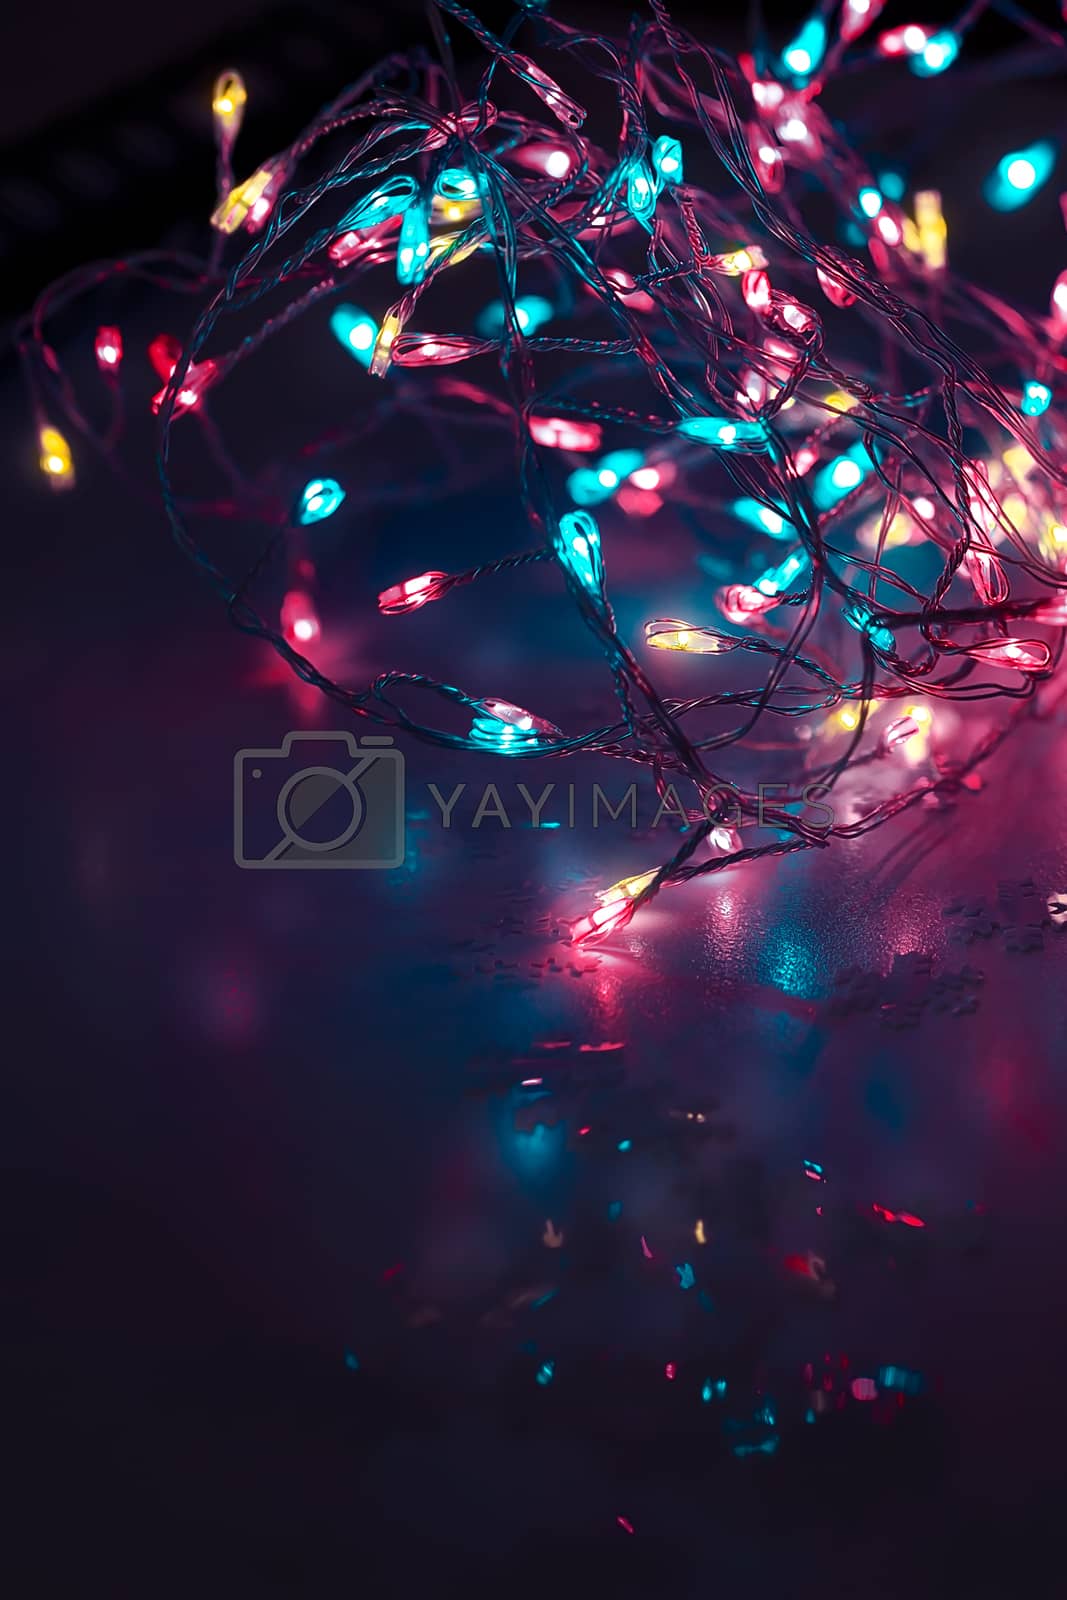 Royalty free image of Party lights background by Anna_Omelchenko